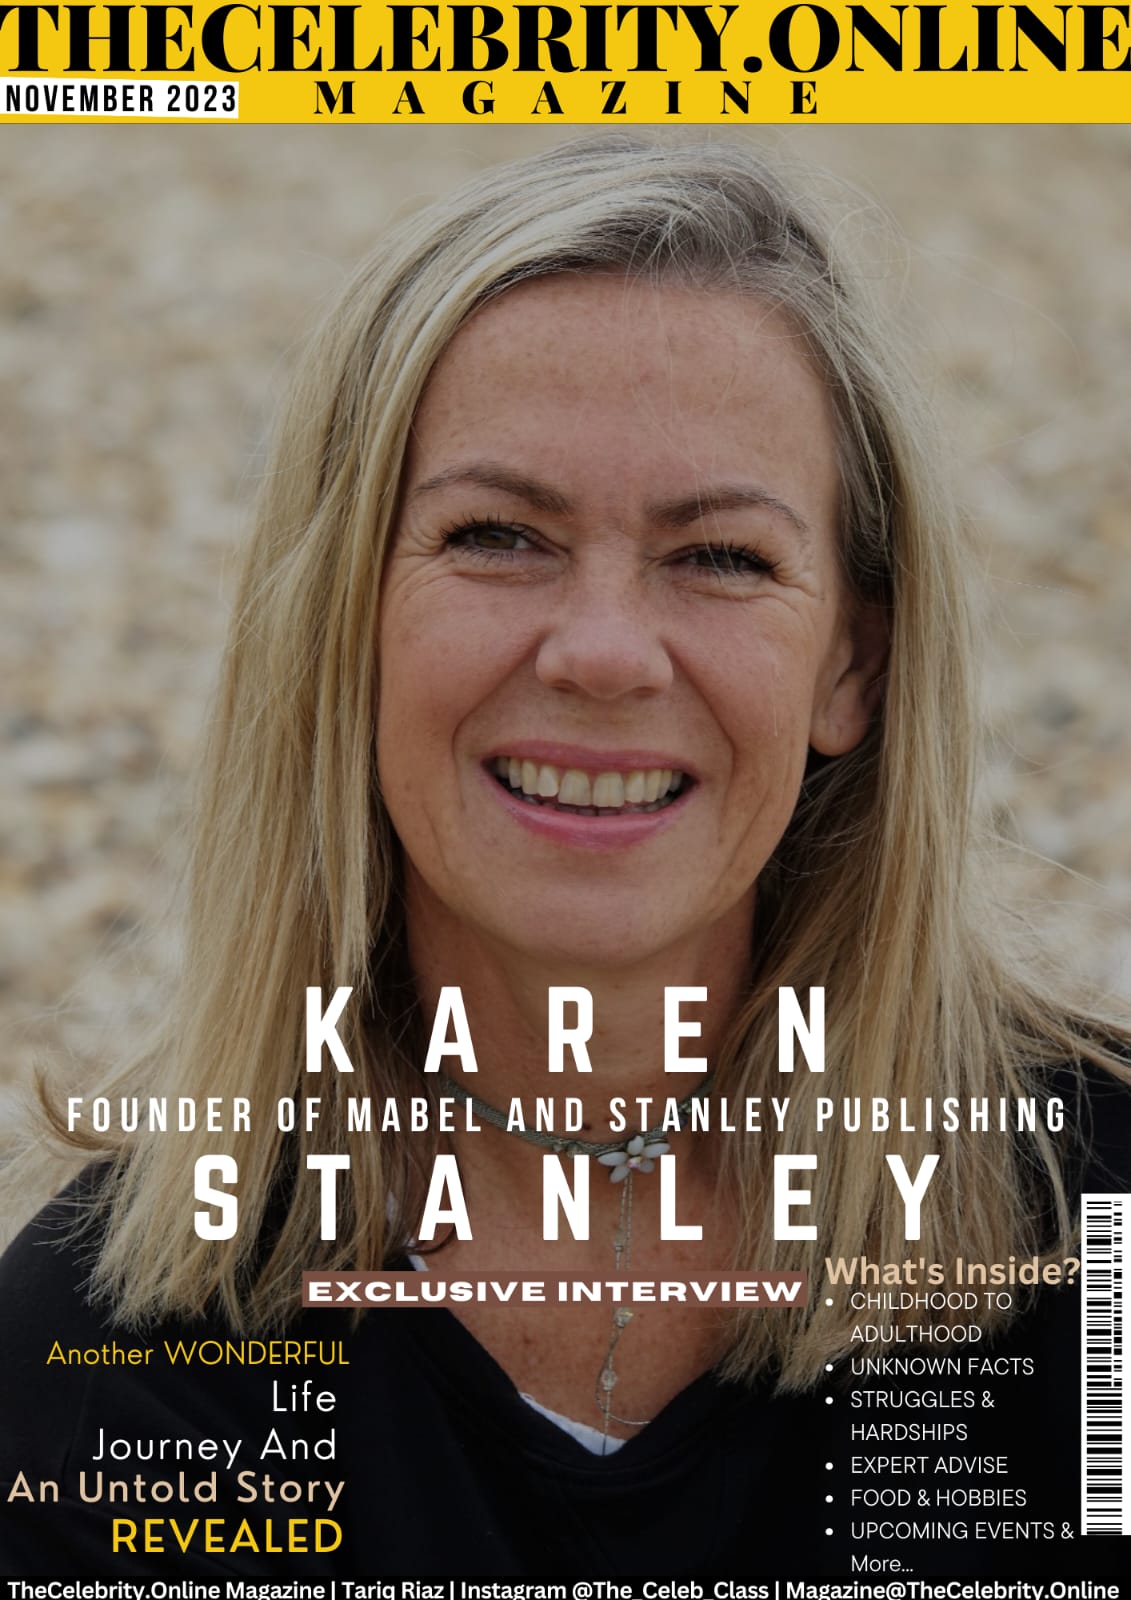 Karen Stanley Founder of Mabel and Stanley Publishing – Exclusive Interview